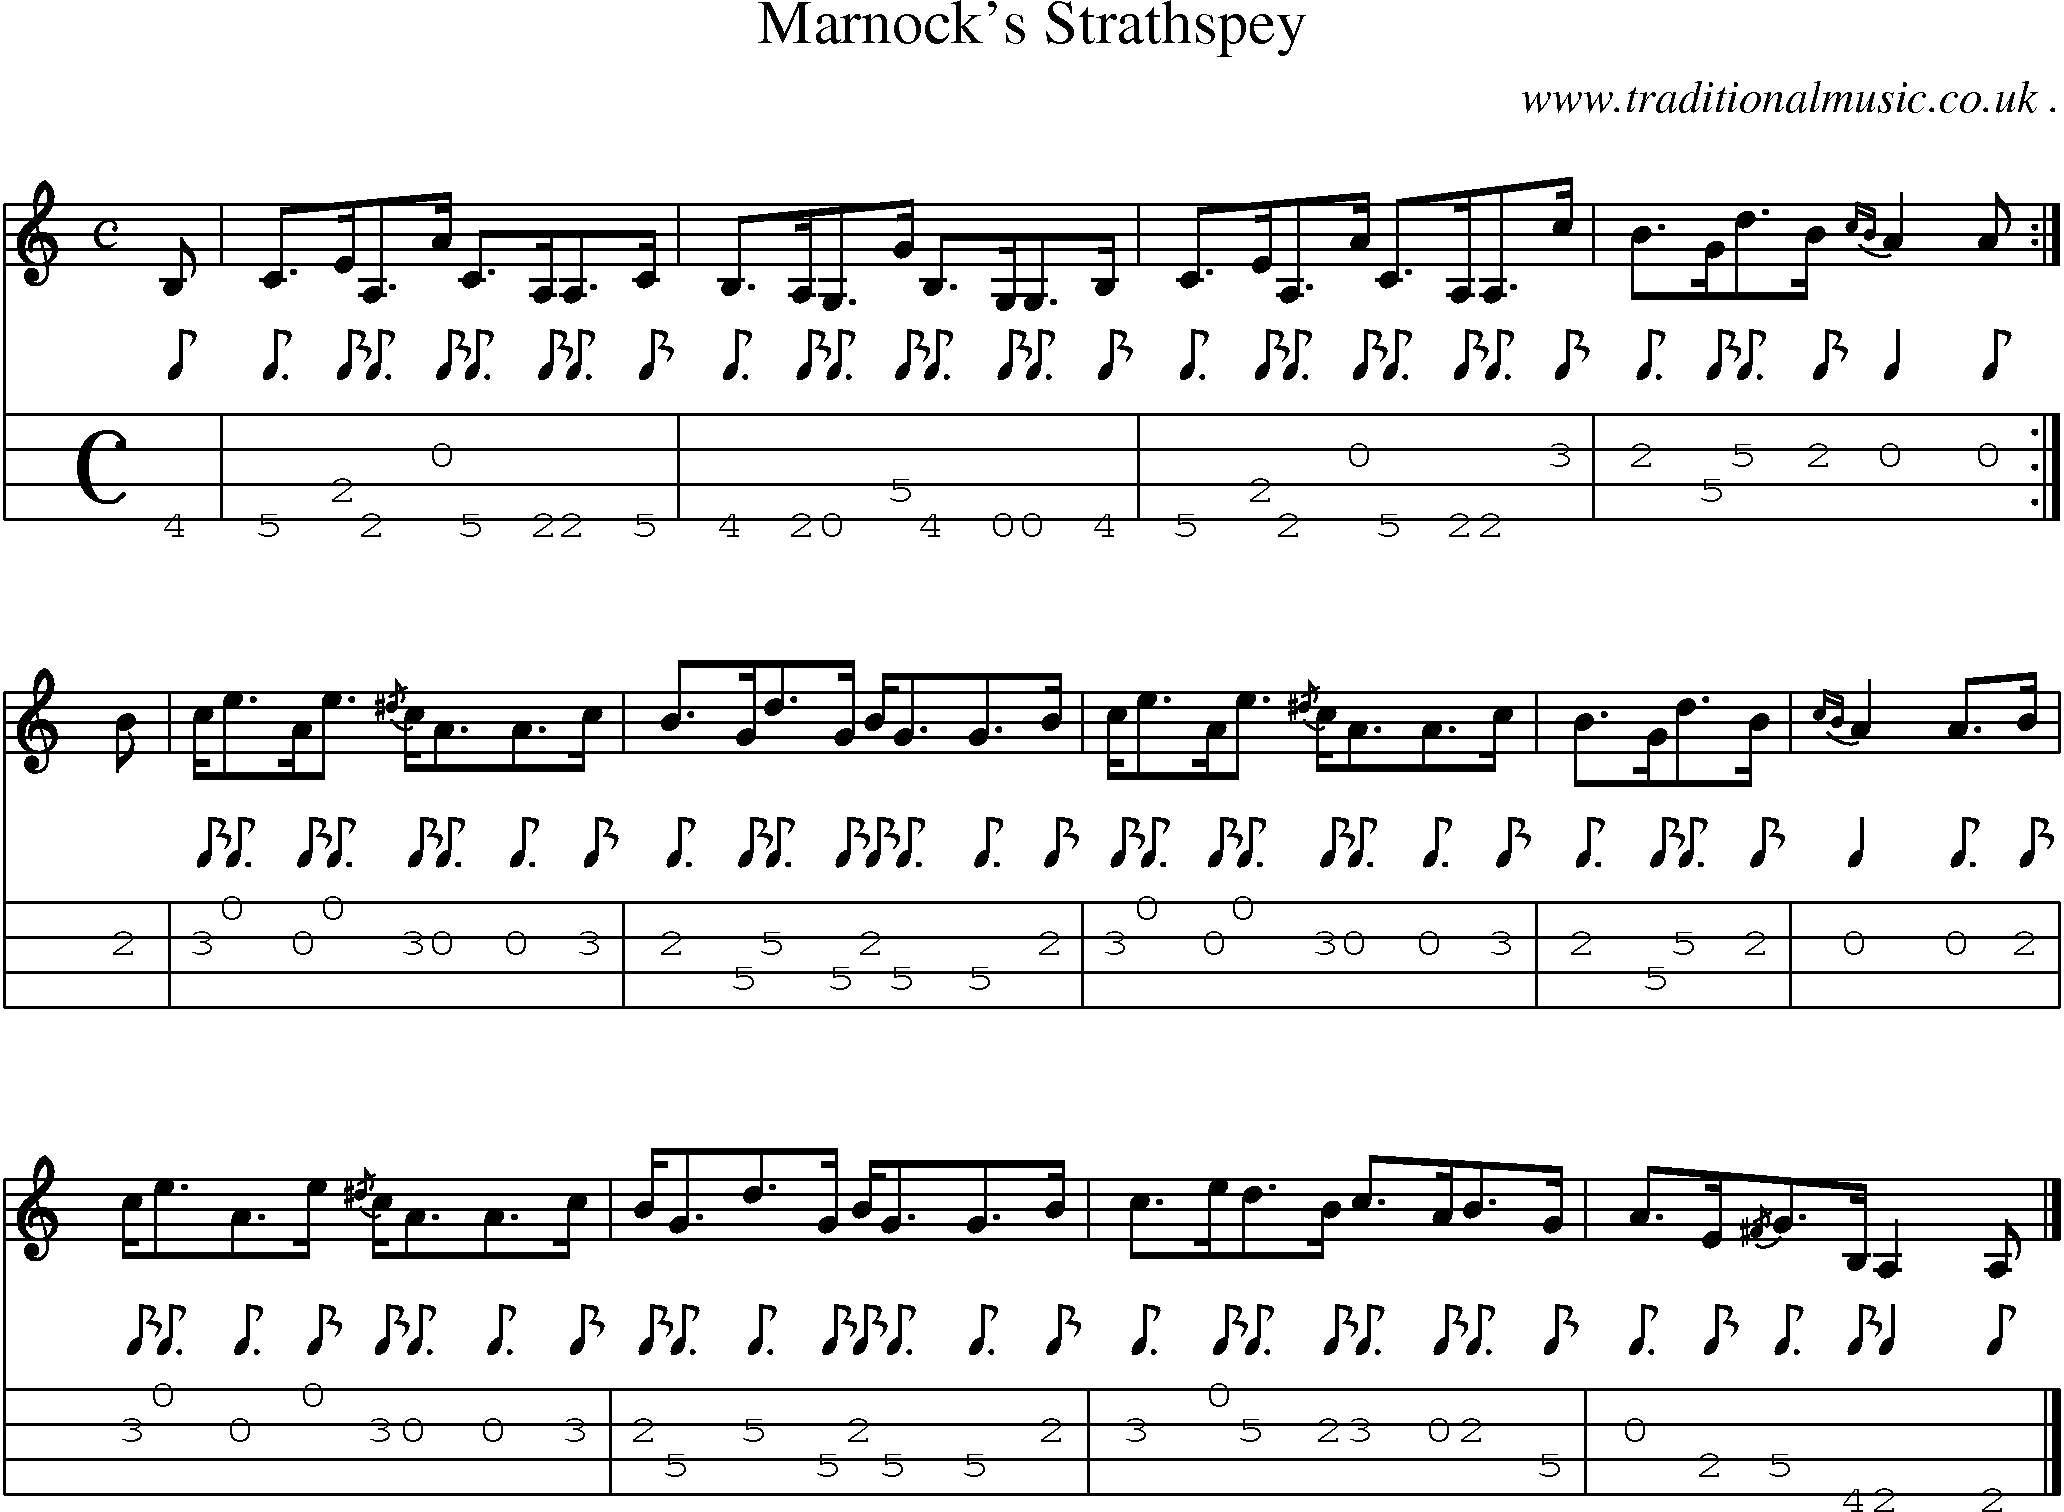 Sheet-music  score, Chords and Mandolin Tabs for Marnocks Strathspey